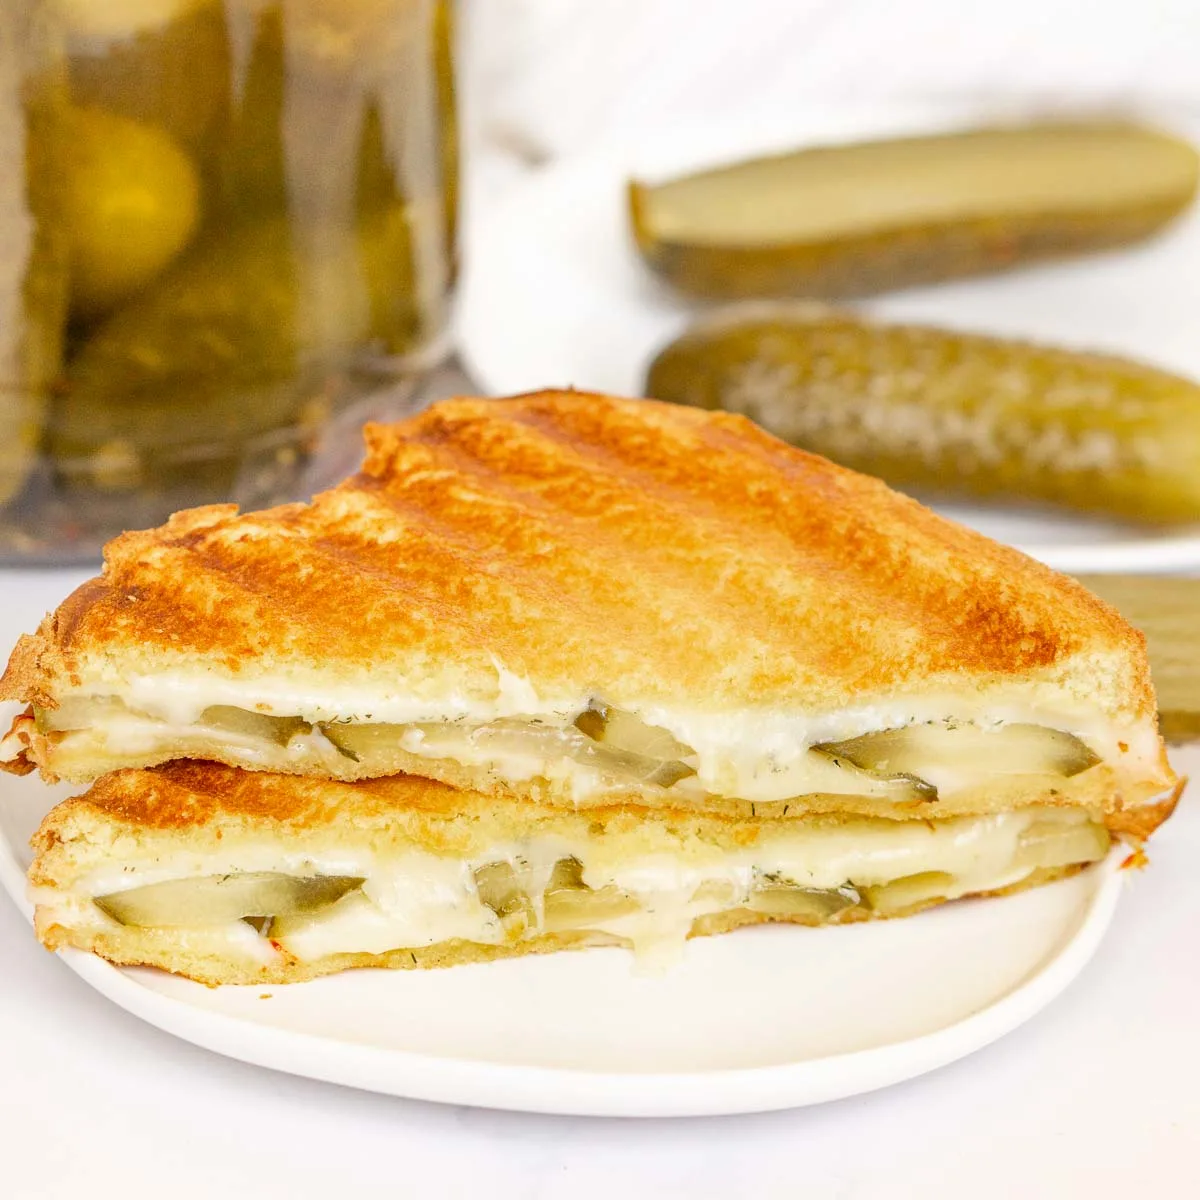 Grilled cheese sandwich with pickles on a plate